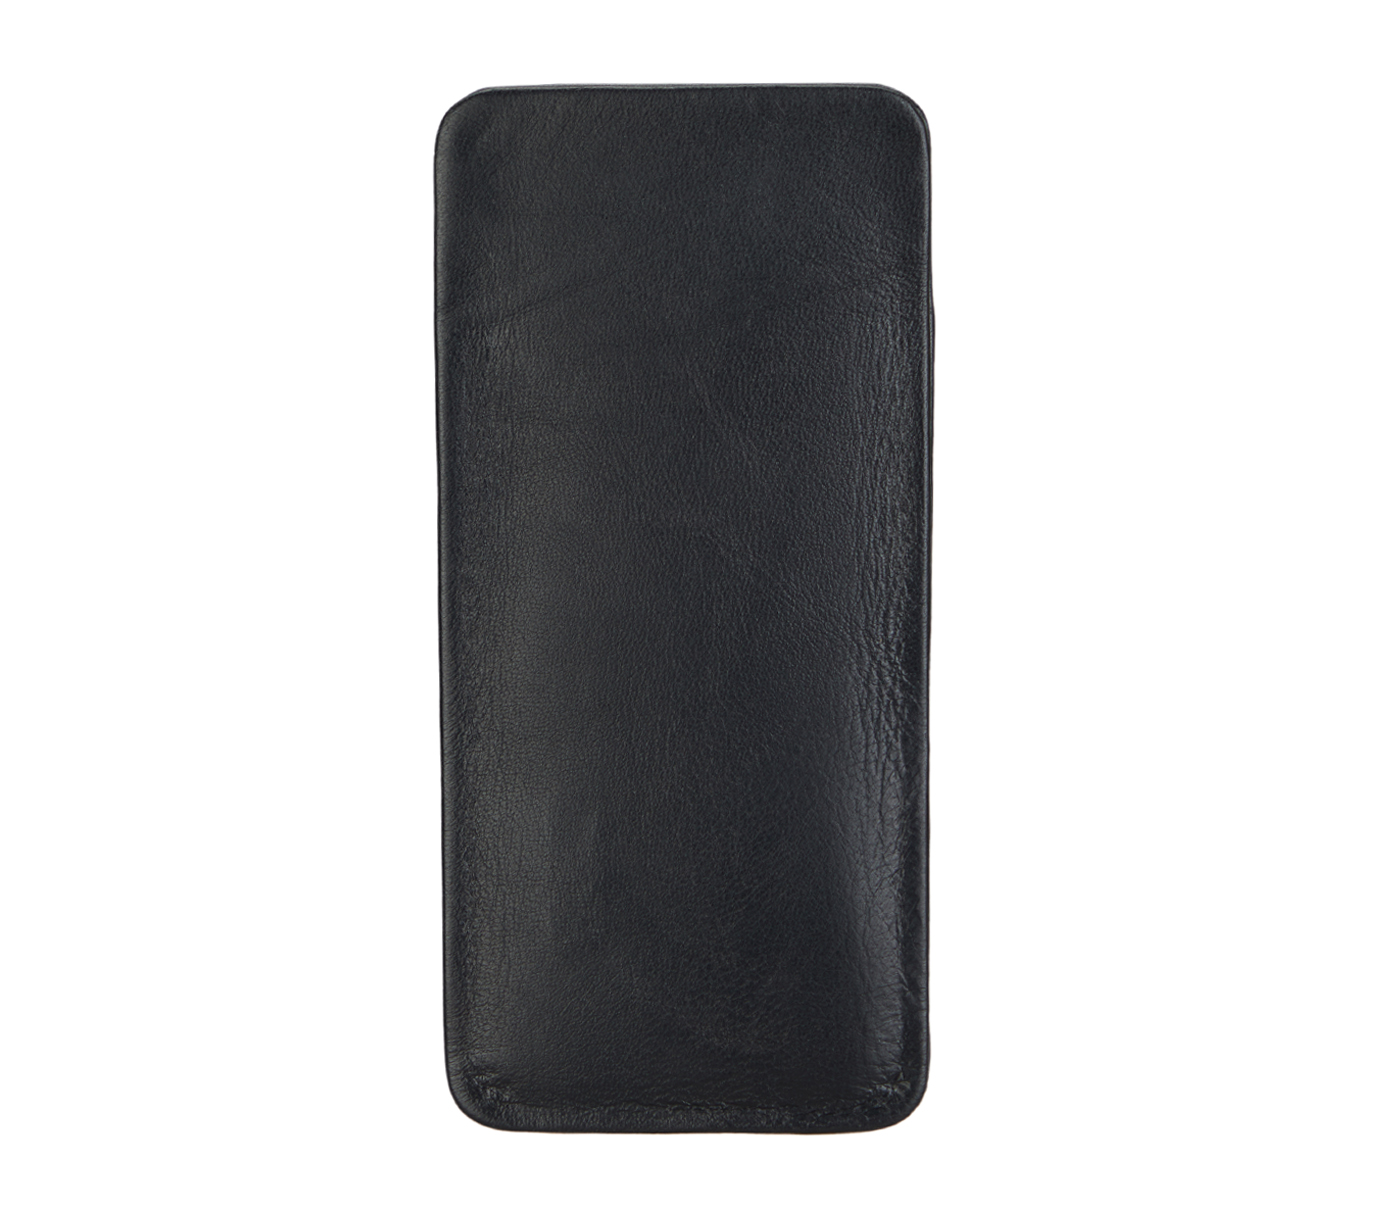 VW11--Soft stitch free spectacle case in Genuine Leather - Black